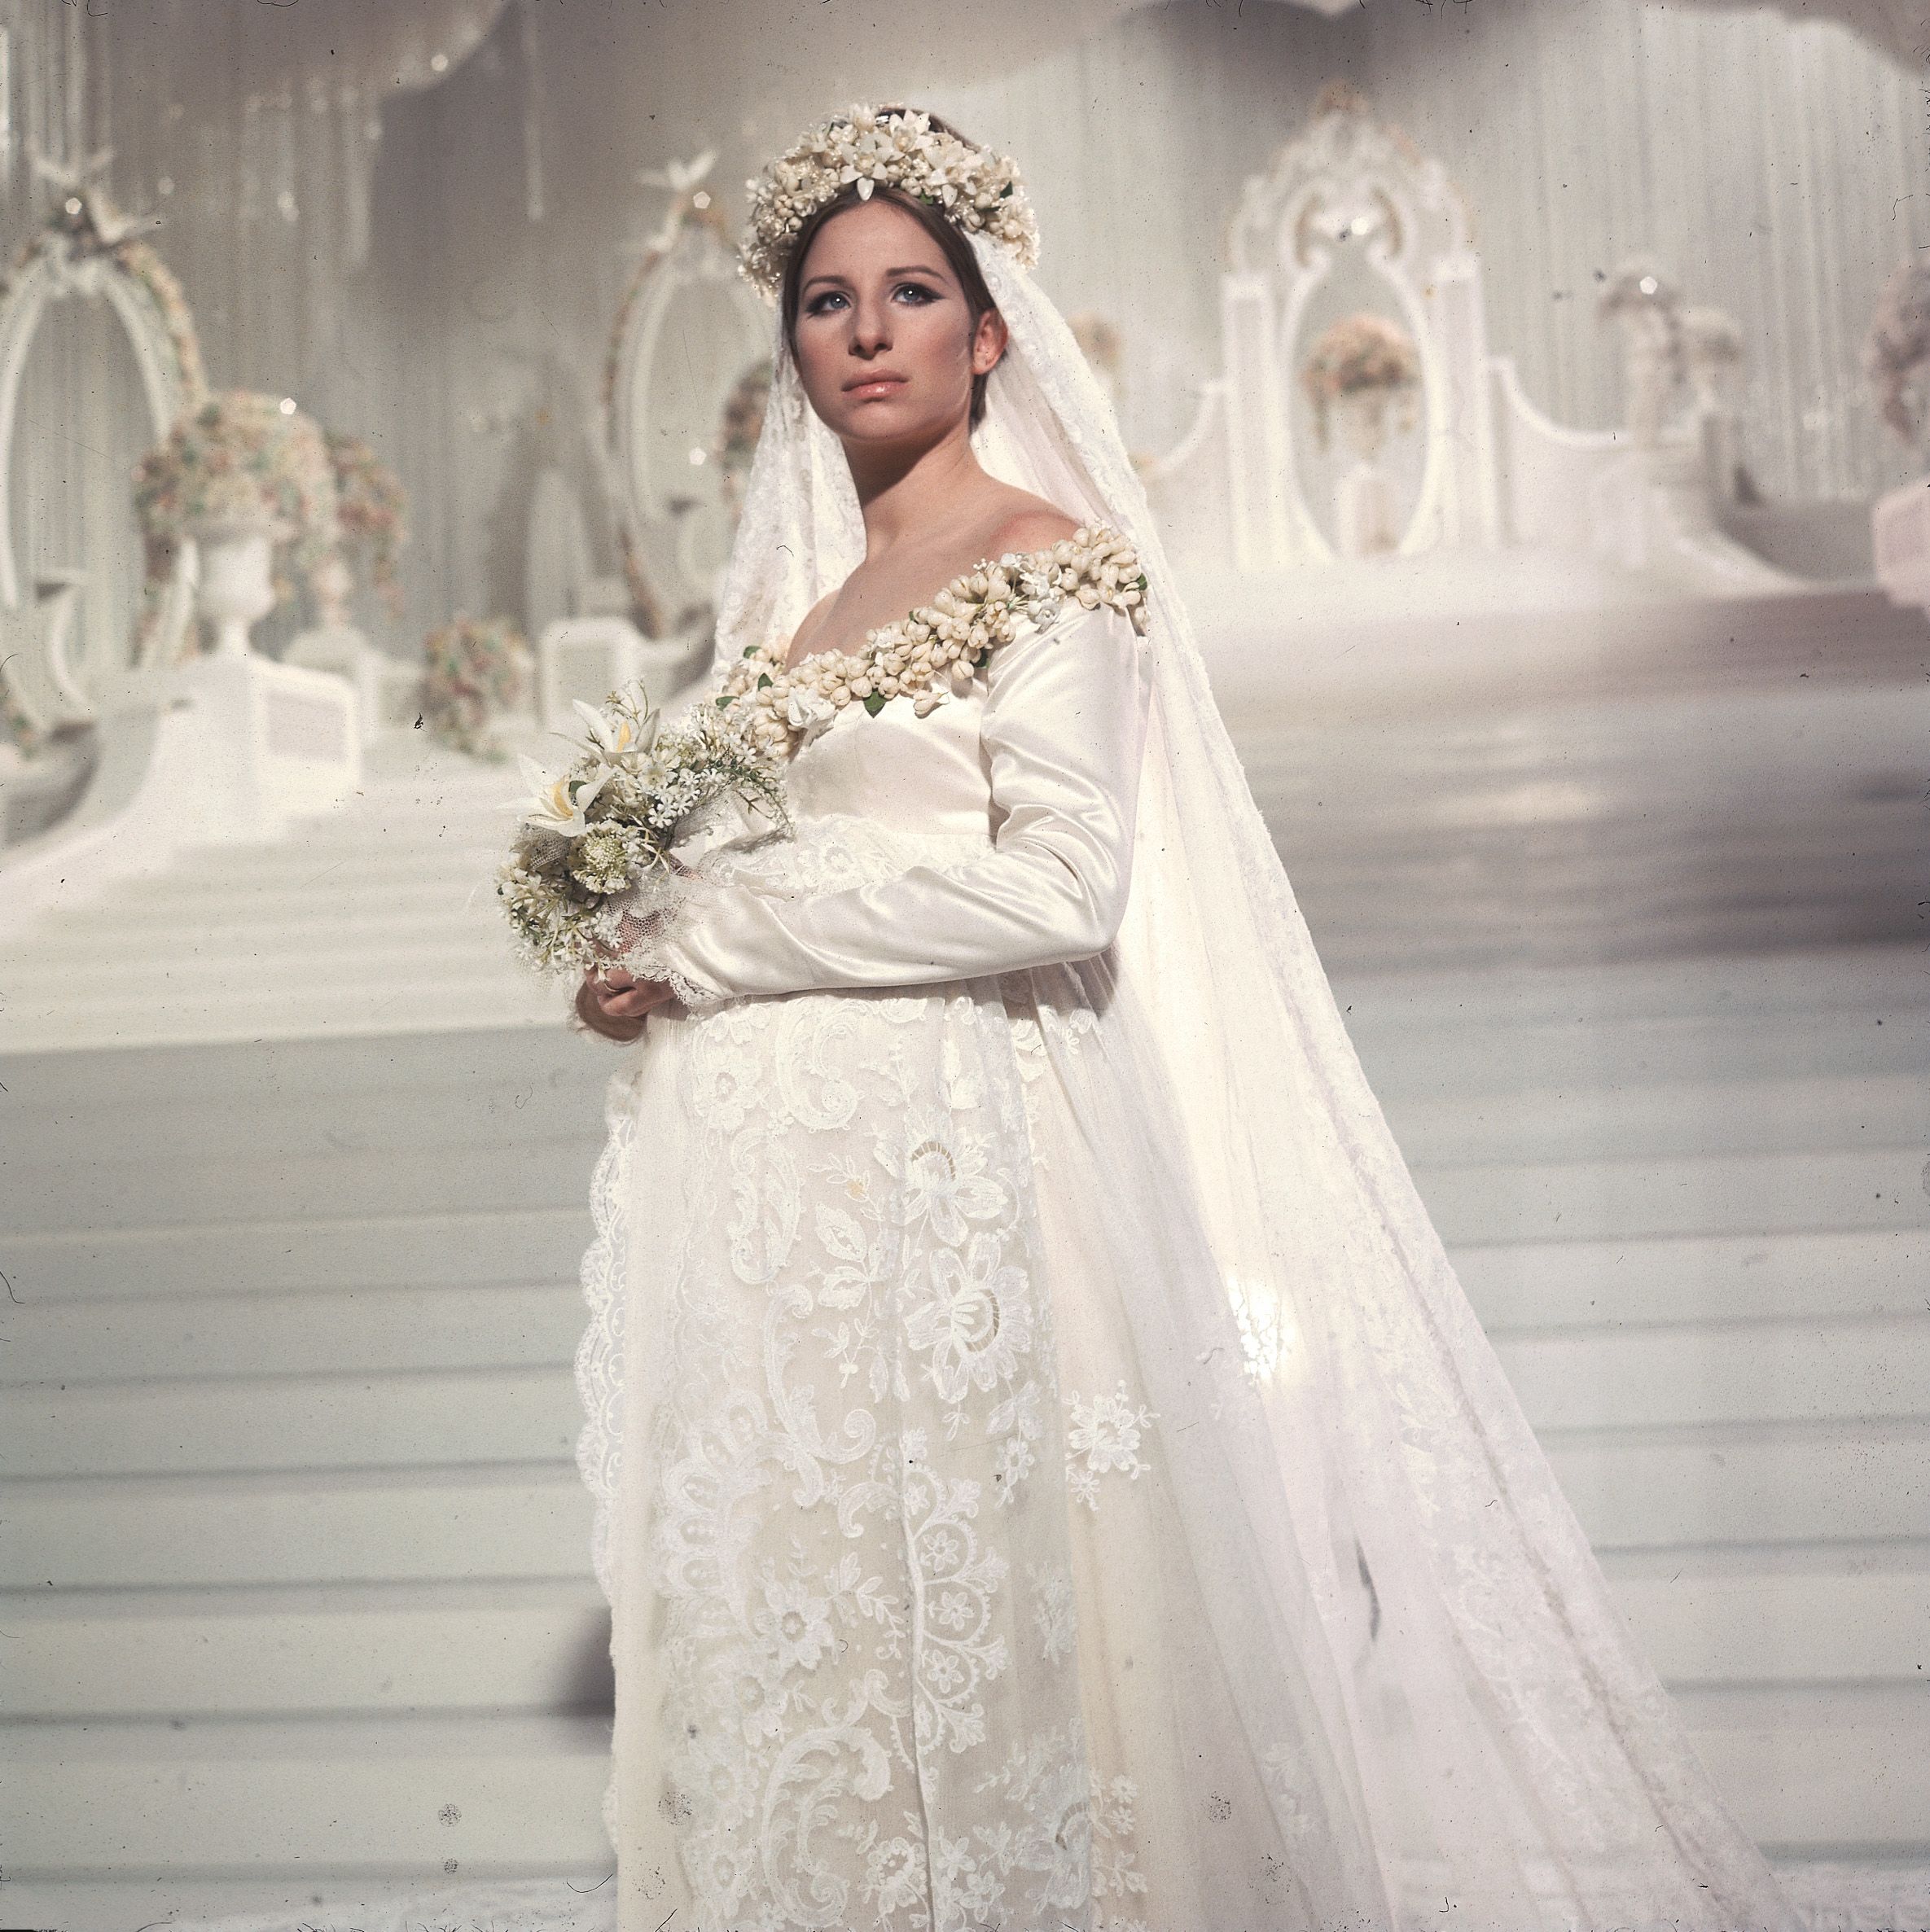 The 73 Most Scandalous Wedding Dresses of All Time - Famous